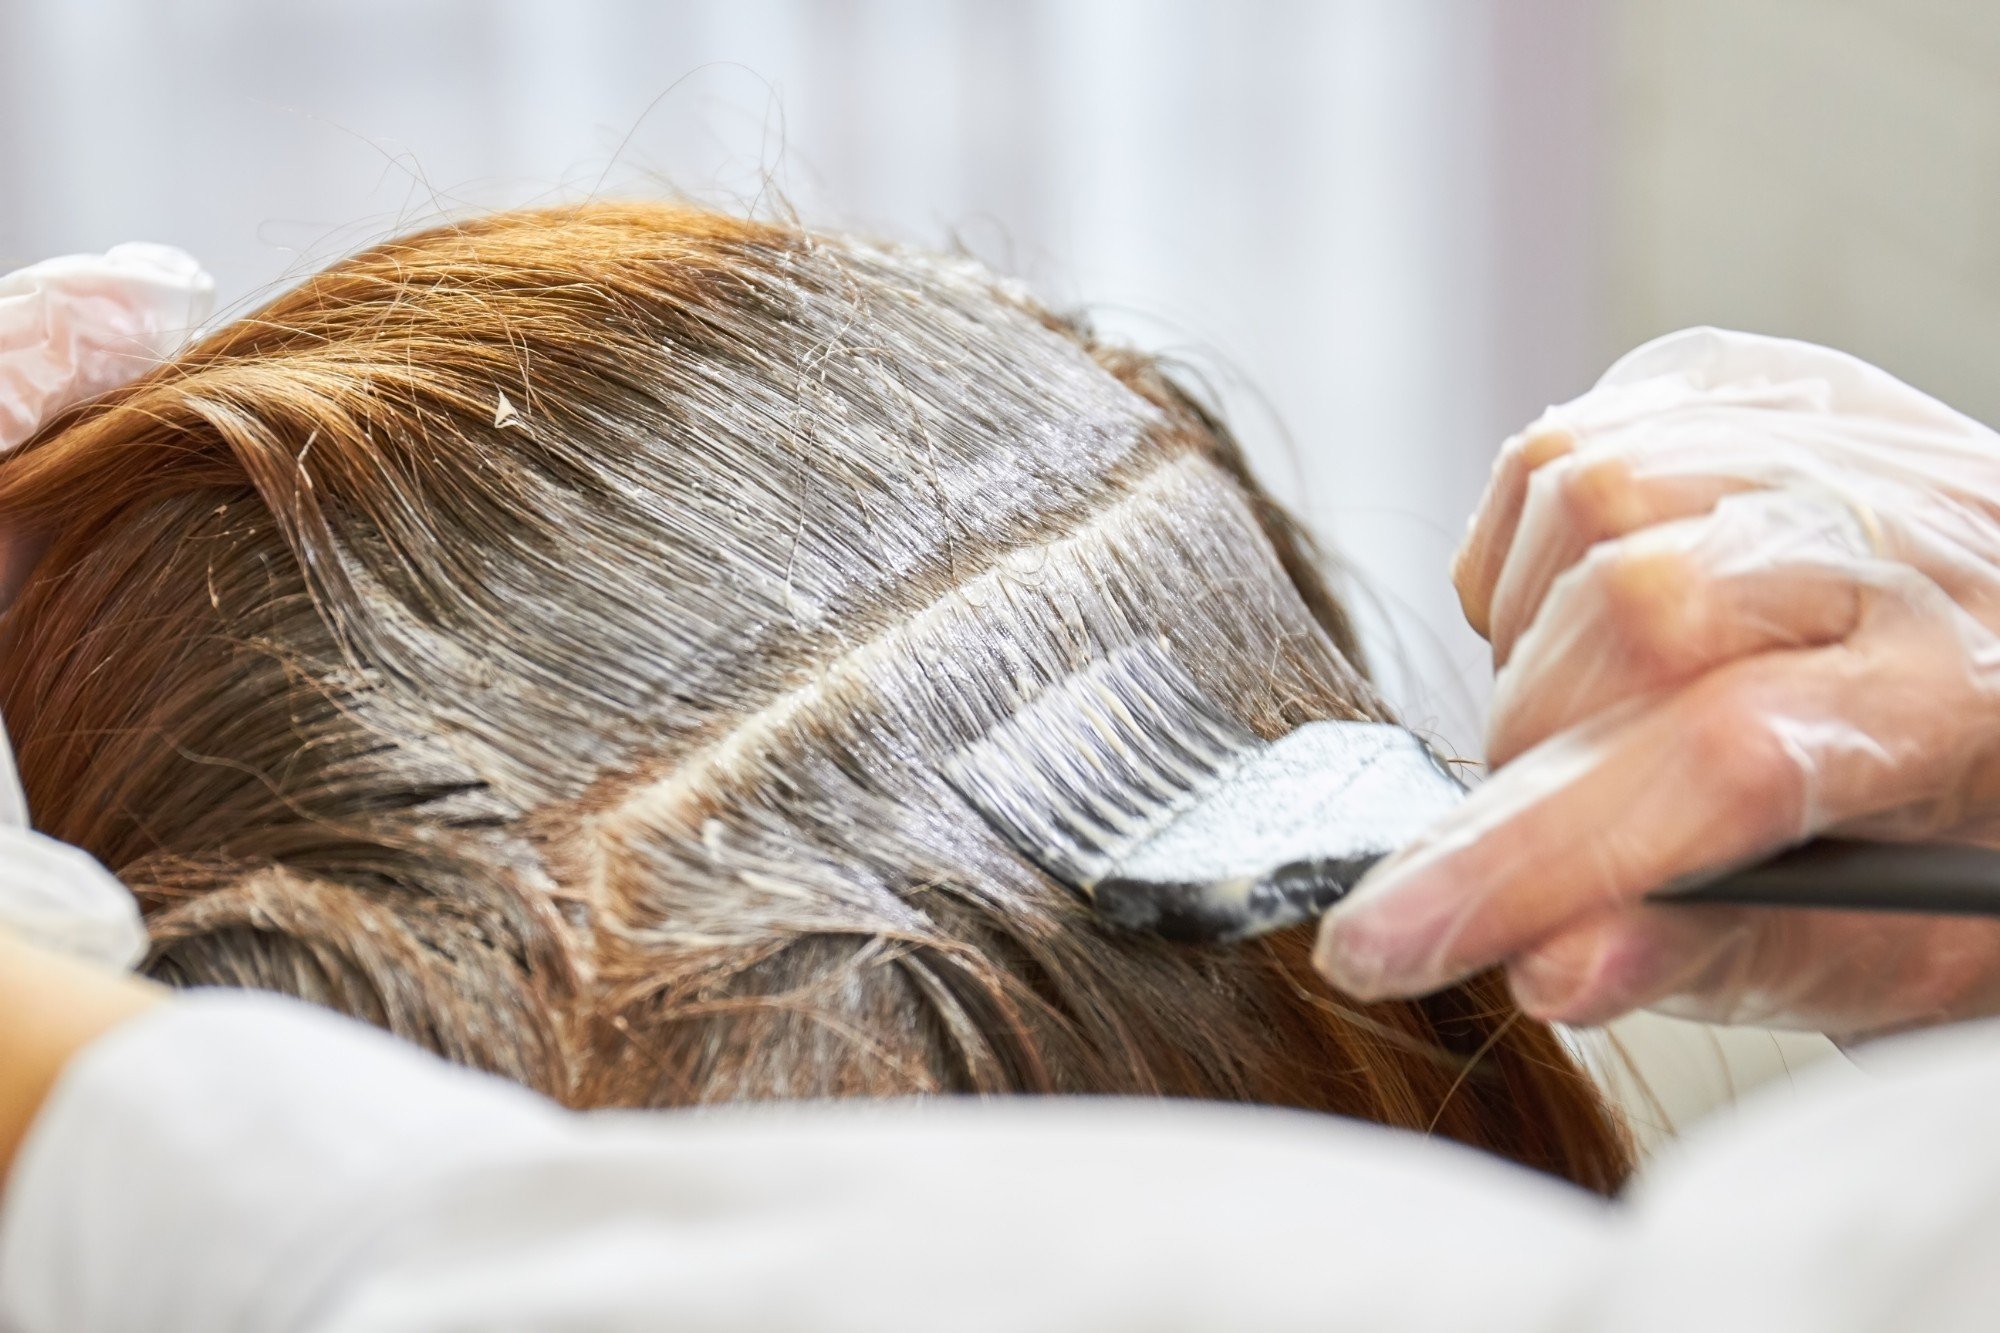 View of hair that is being applied with a hair product